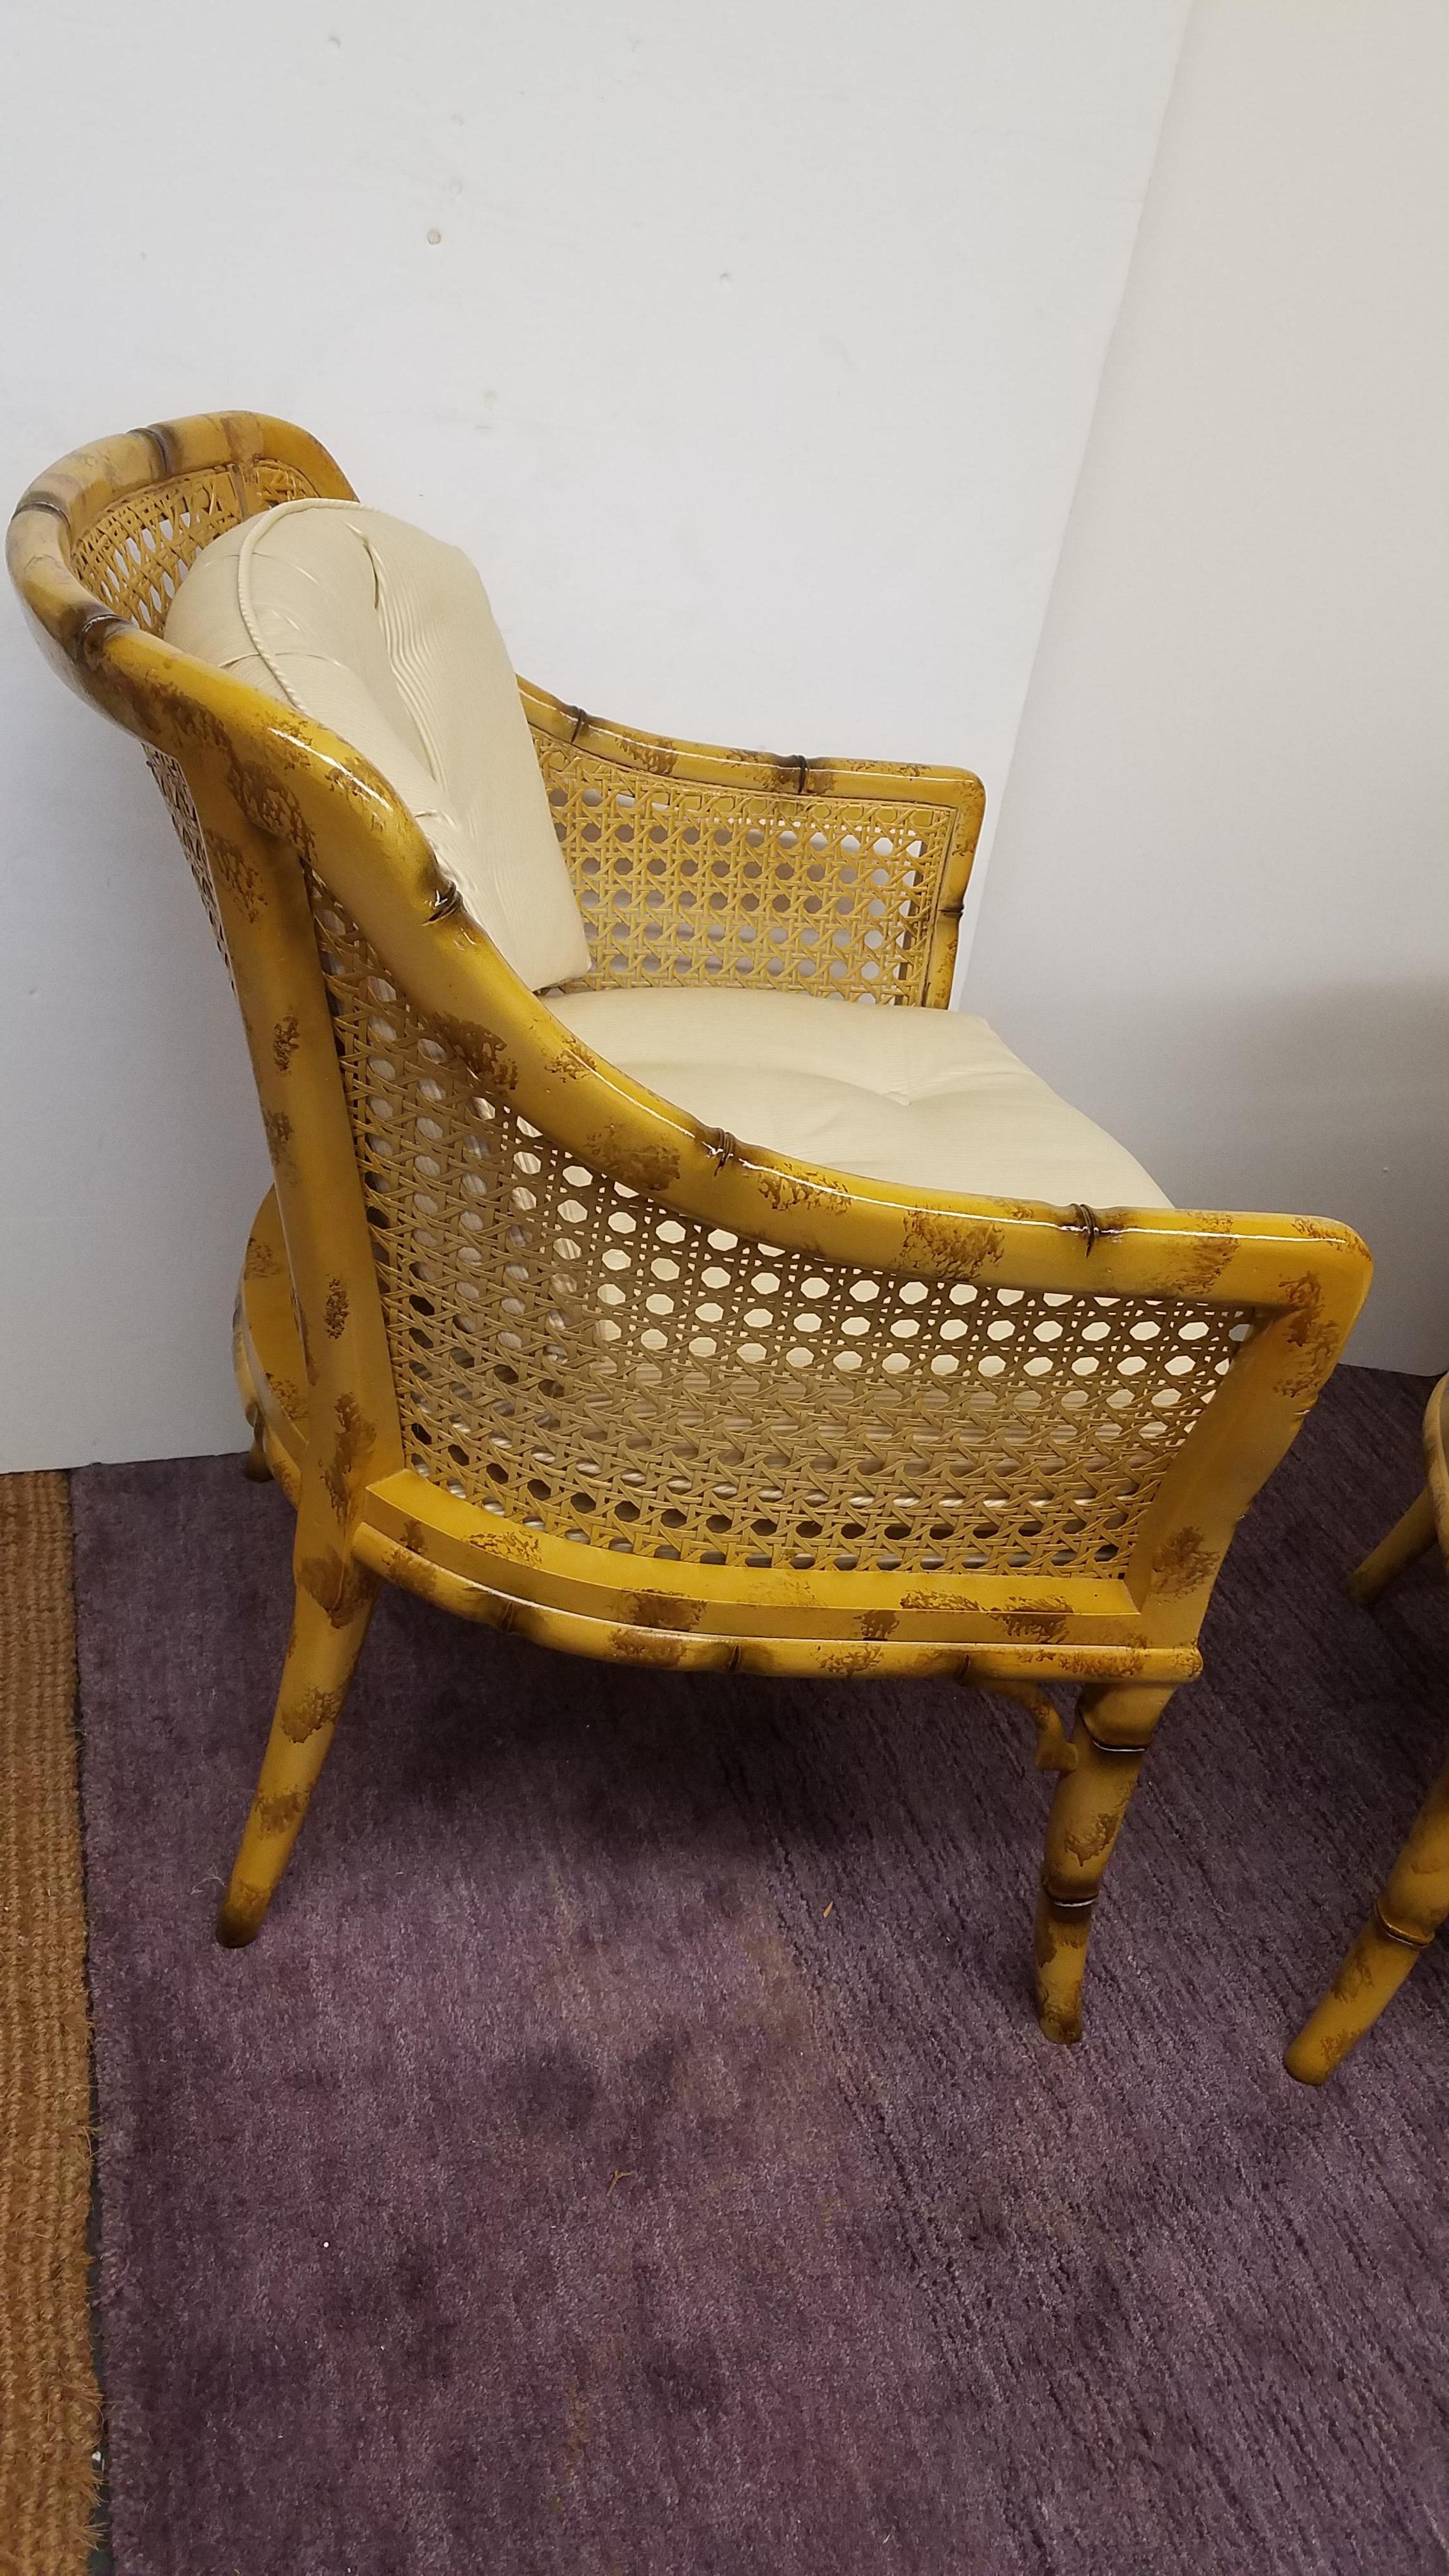 A wonderful pair of faux painted bamboo motif Armchairs with a glossy light tortoise finish. The sturdy frames with caned back and sides with cushions in an ivory cream subtle pinstripe. Excellent condition and high quality, attributed to Baker